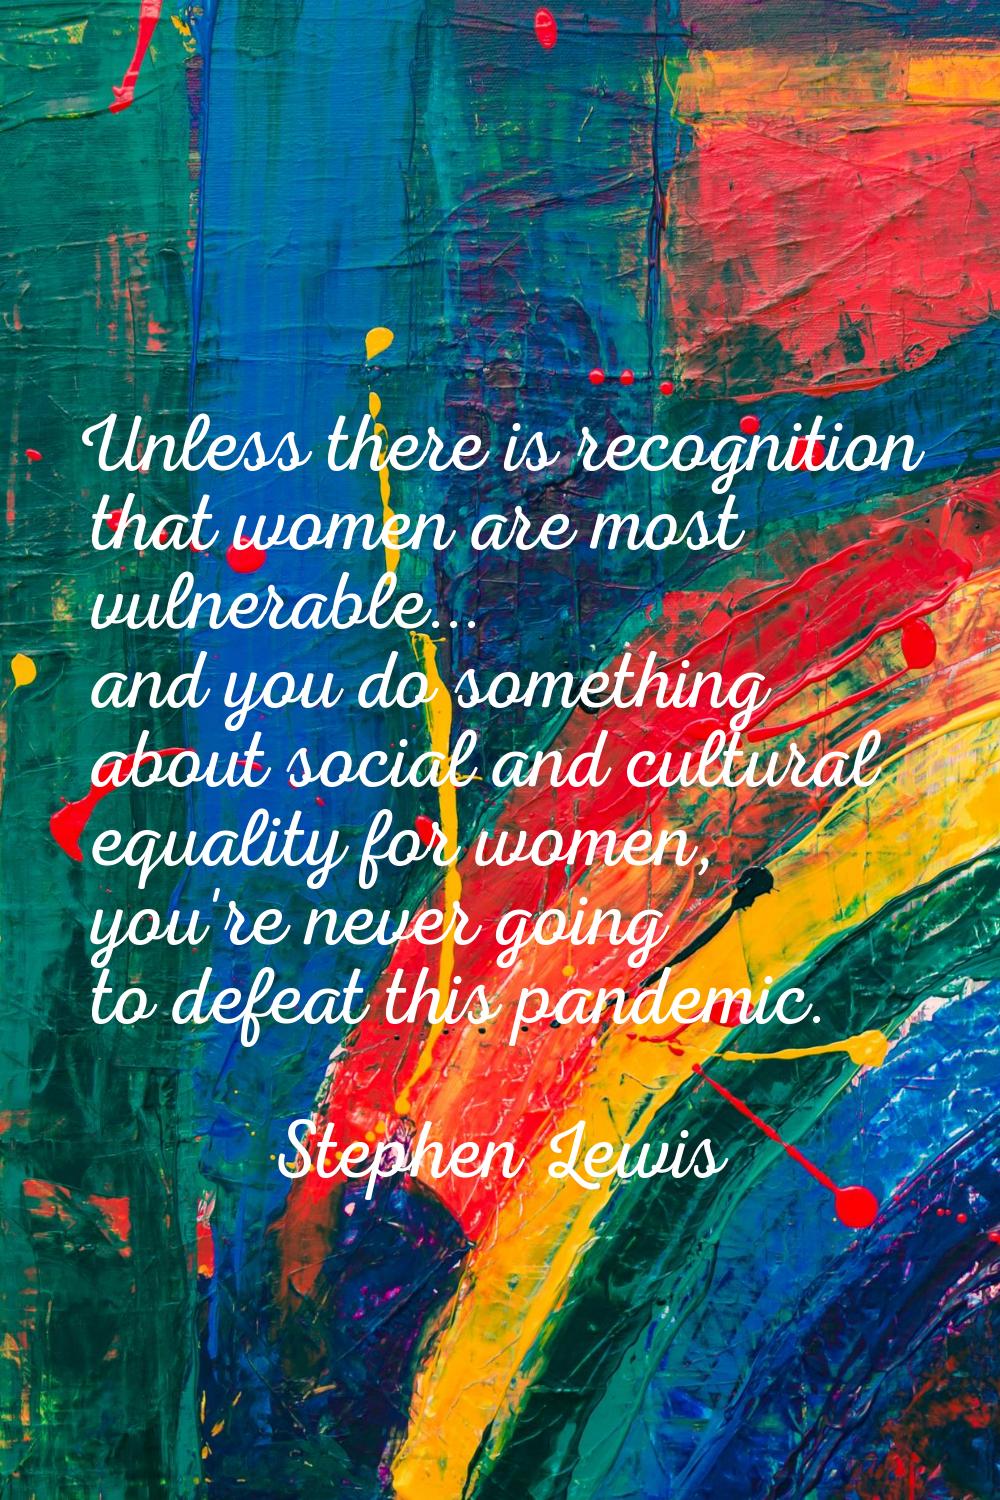 Unless there is recognition that women are most vulnerable... and you do something about social and